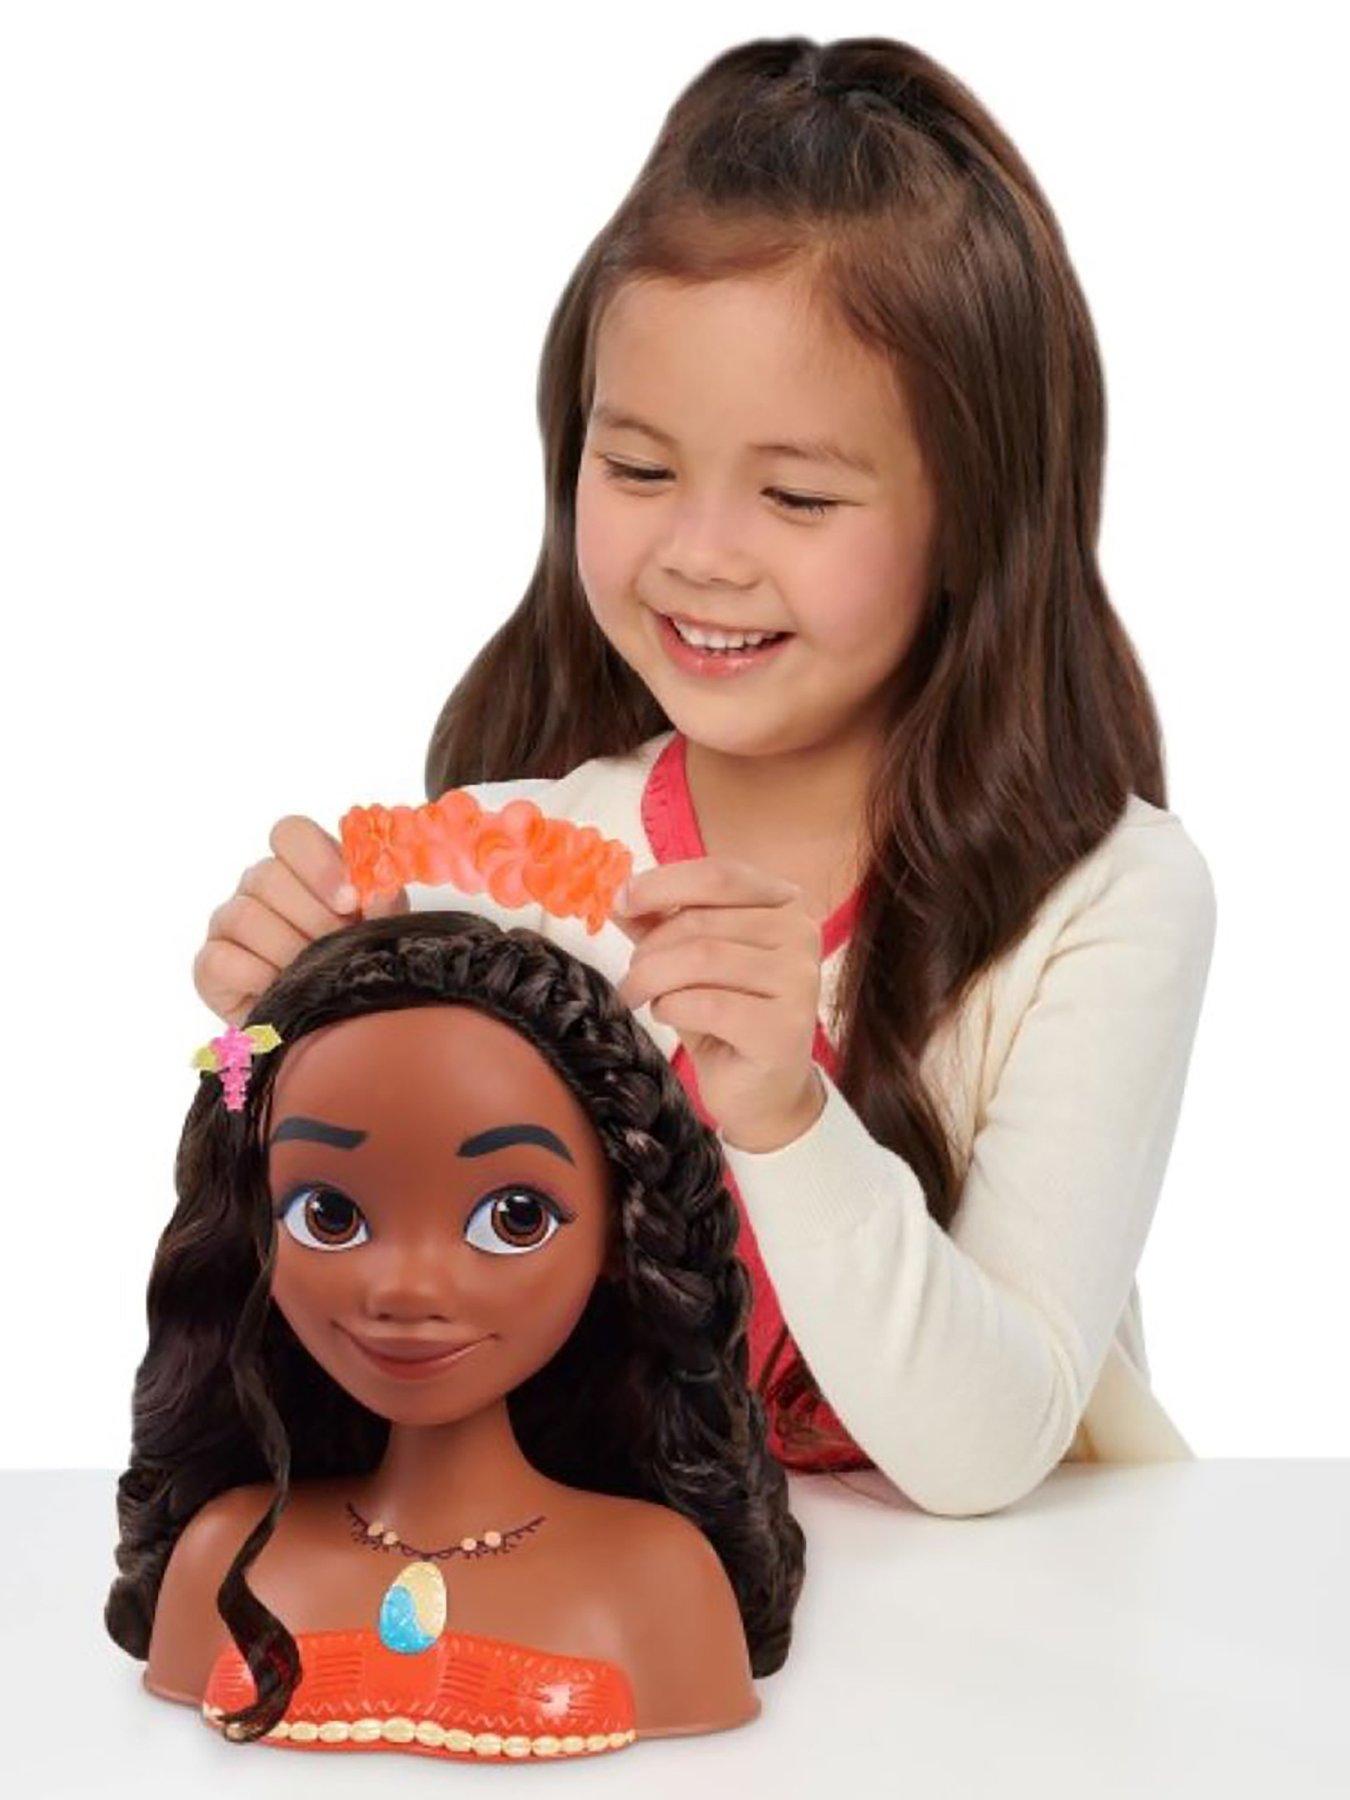 Klein Role Play Styling Head for Kids, 11-inch High with Hair